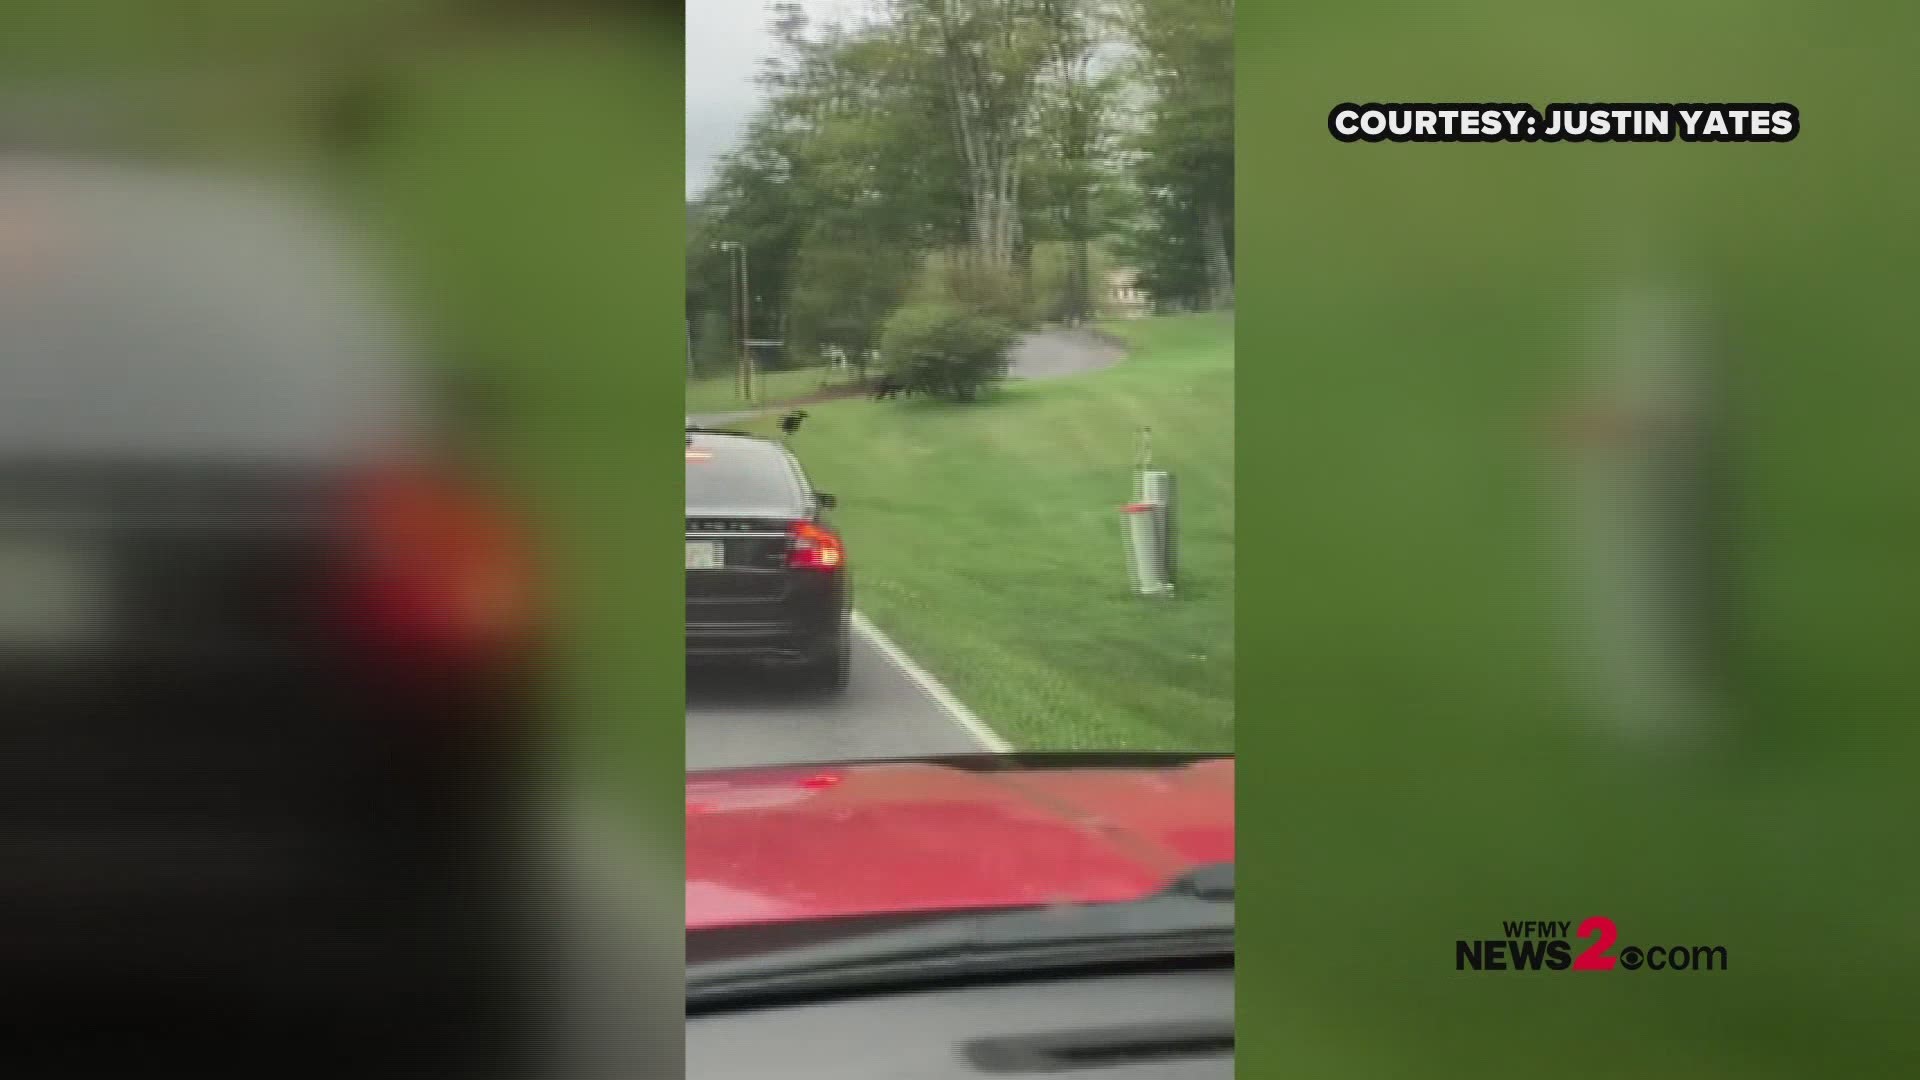 Cuteness alert! Drivers brake for four cubs following a mama bear across a road in Banner Elk, North Carolina on Monday.